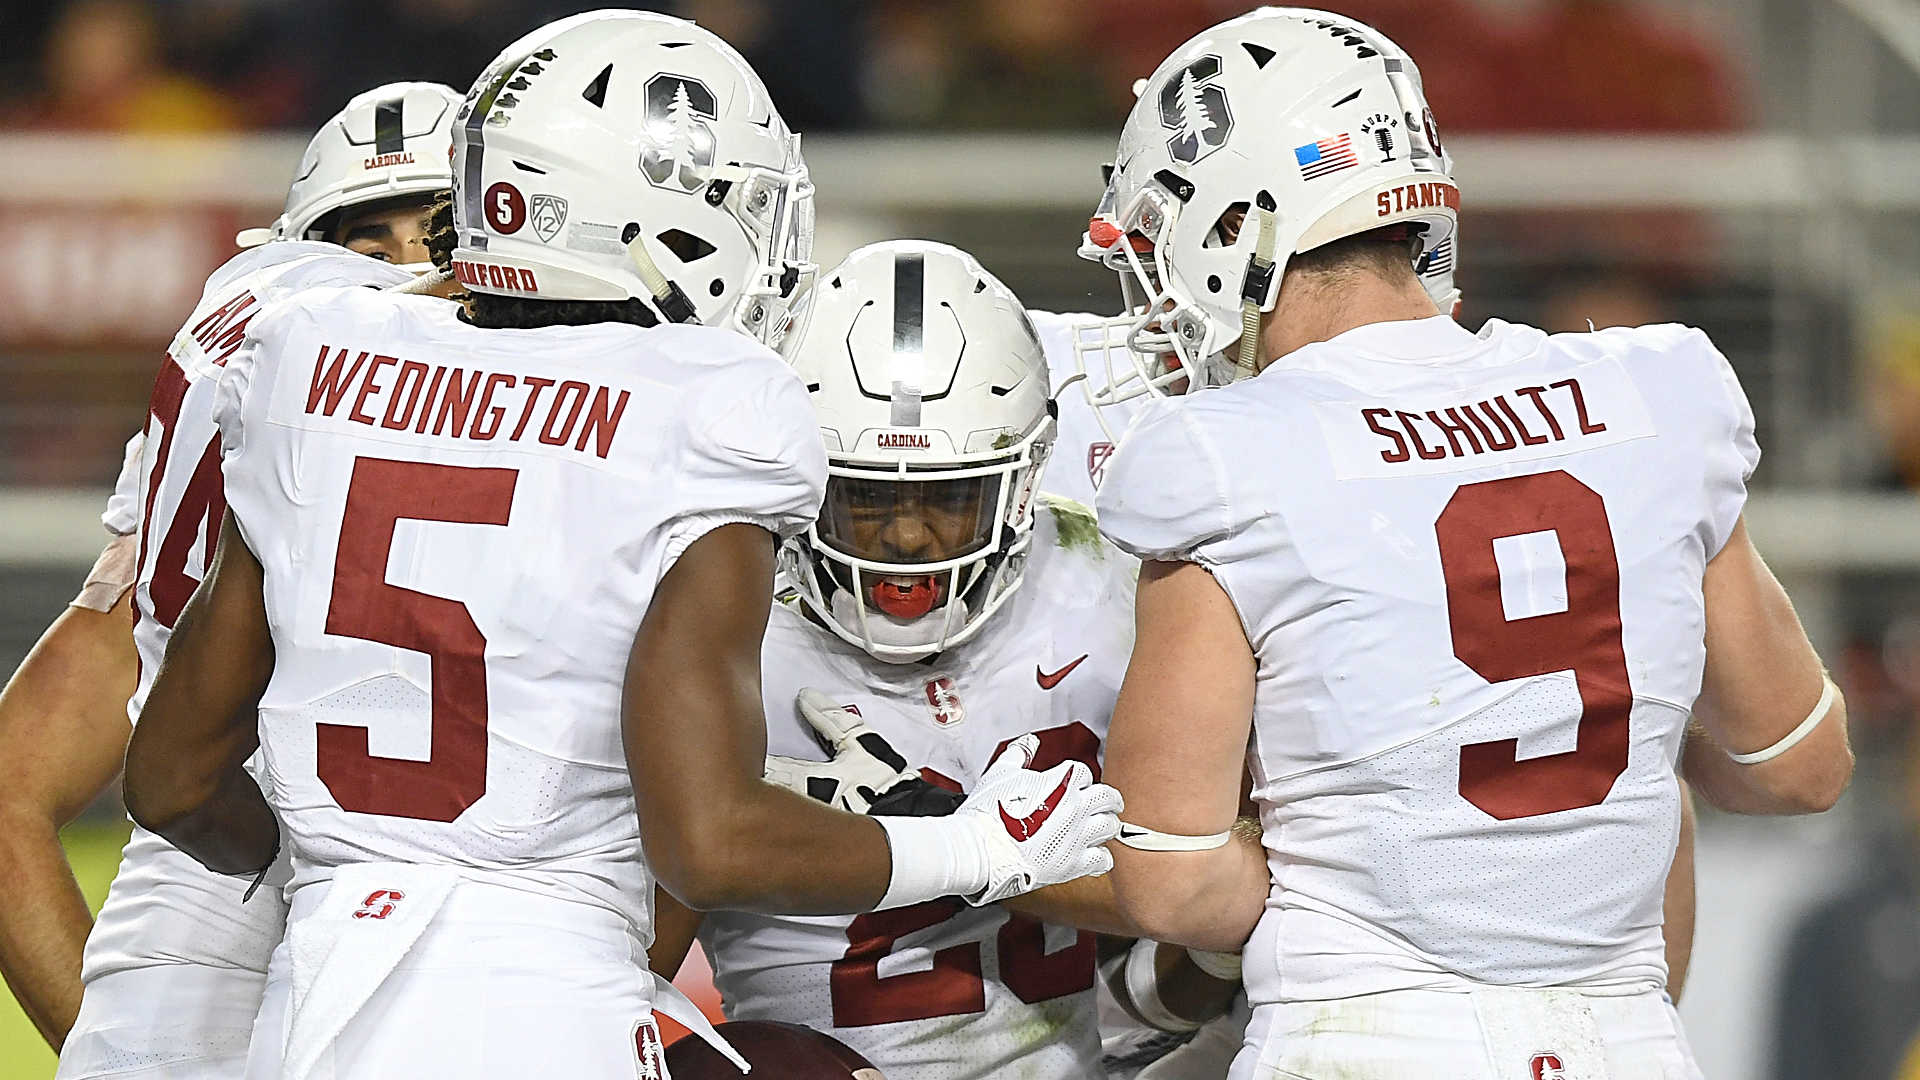 Stanford football schedule, roster, recruiting and what to watch in 2018 | Sporting News